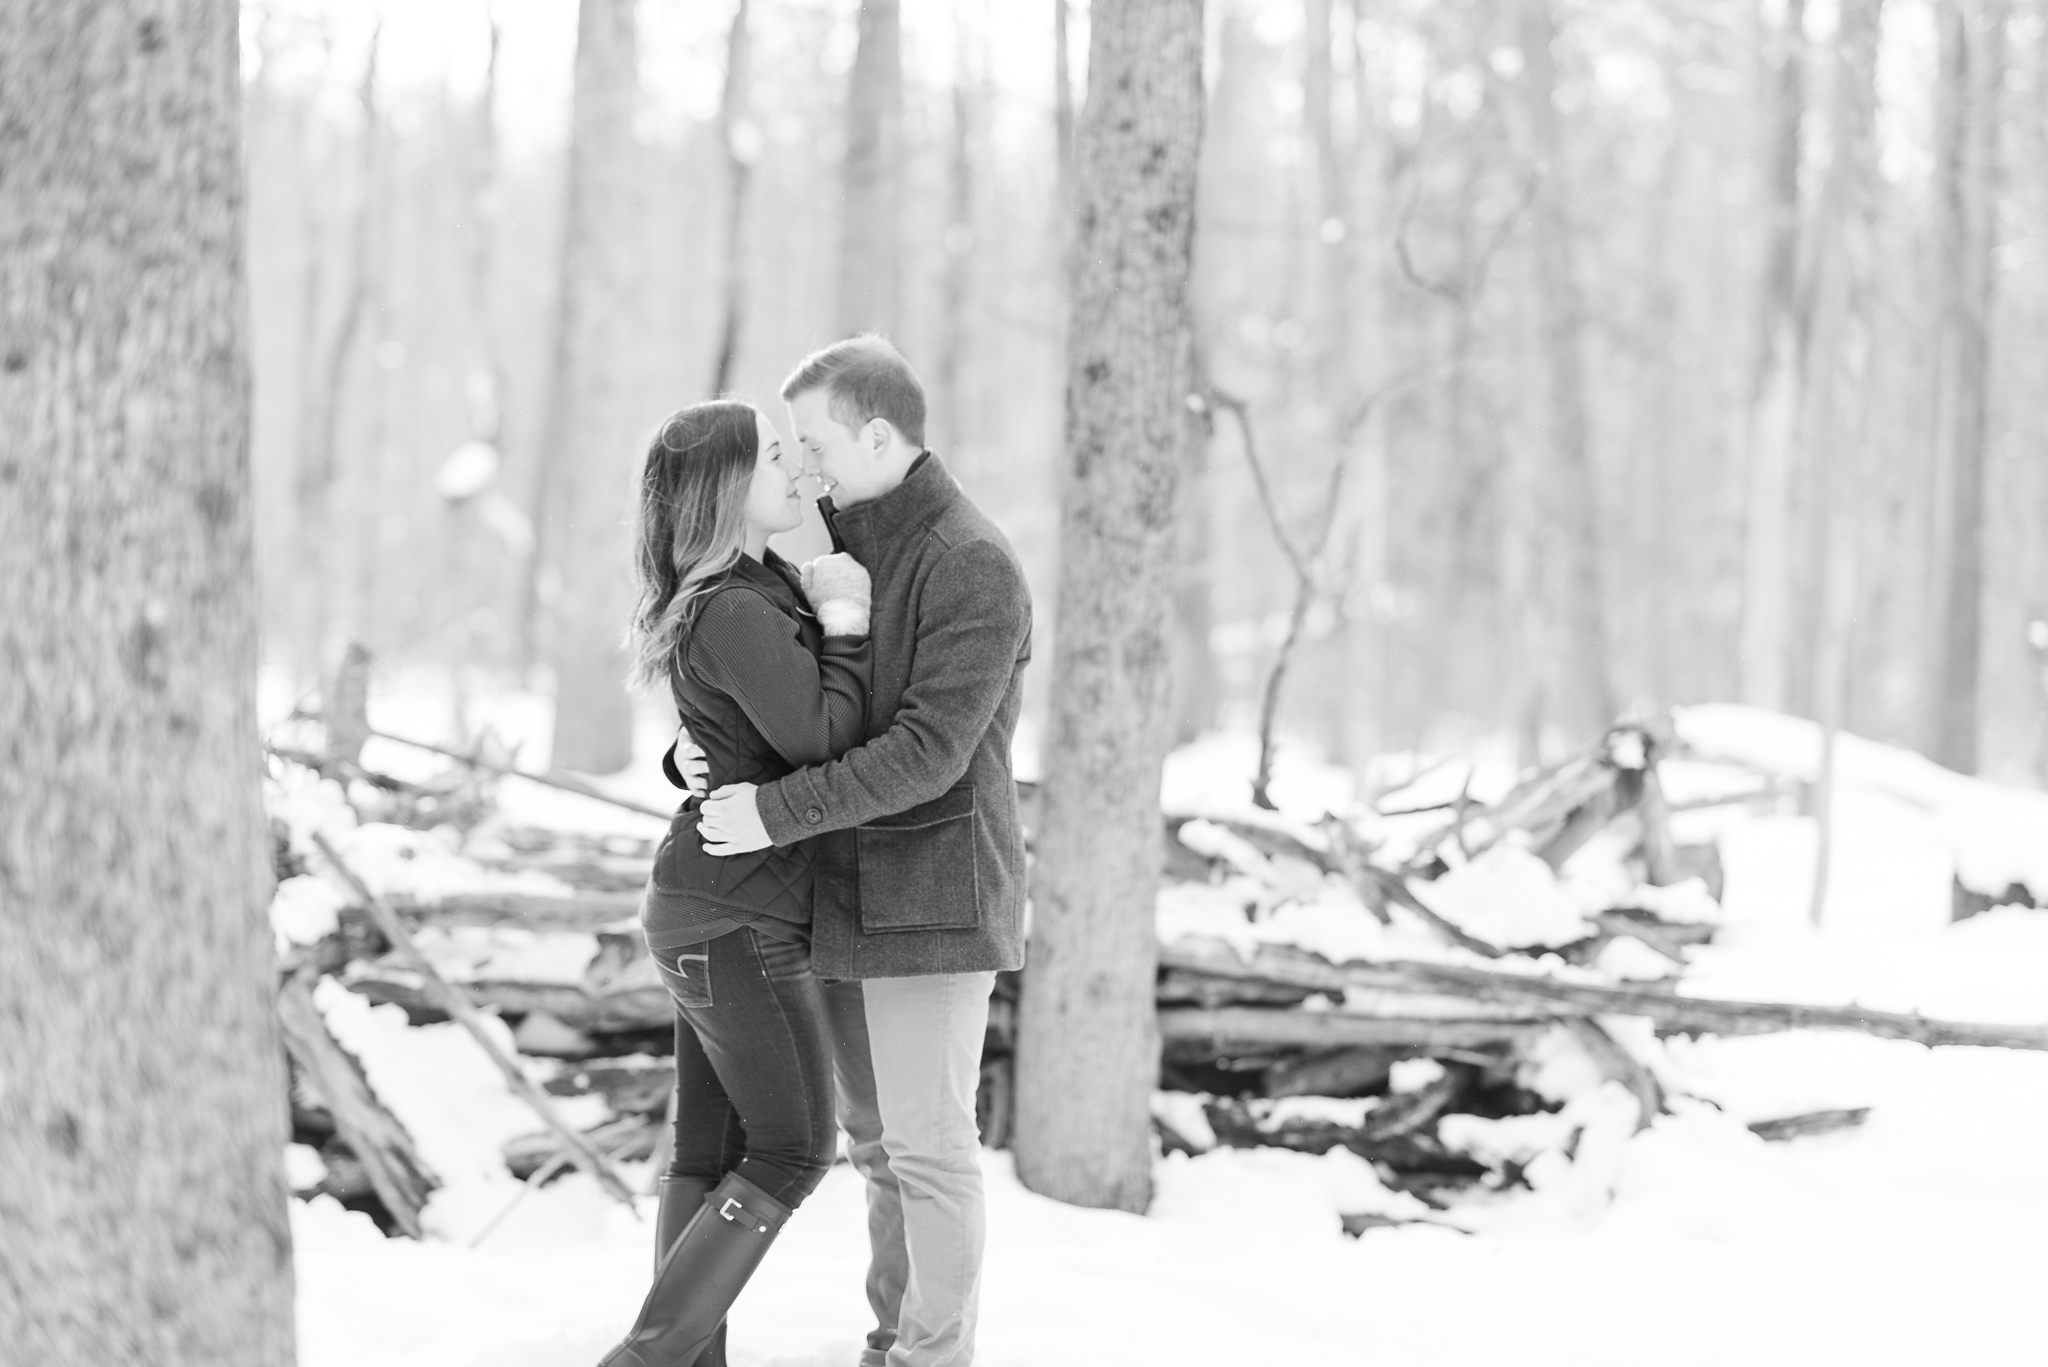 Jack pine trail winter engagement session in ottawa